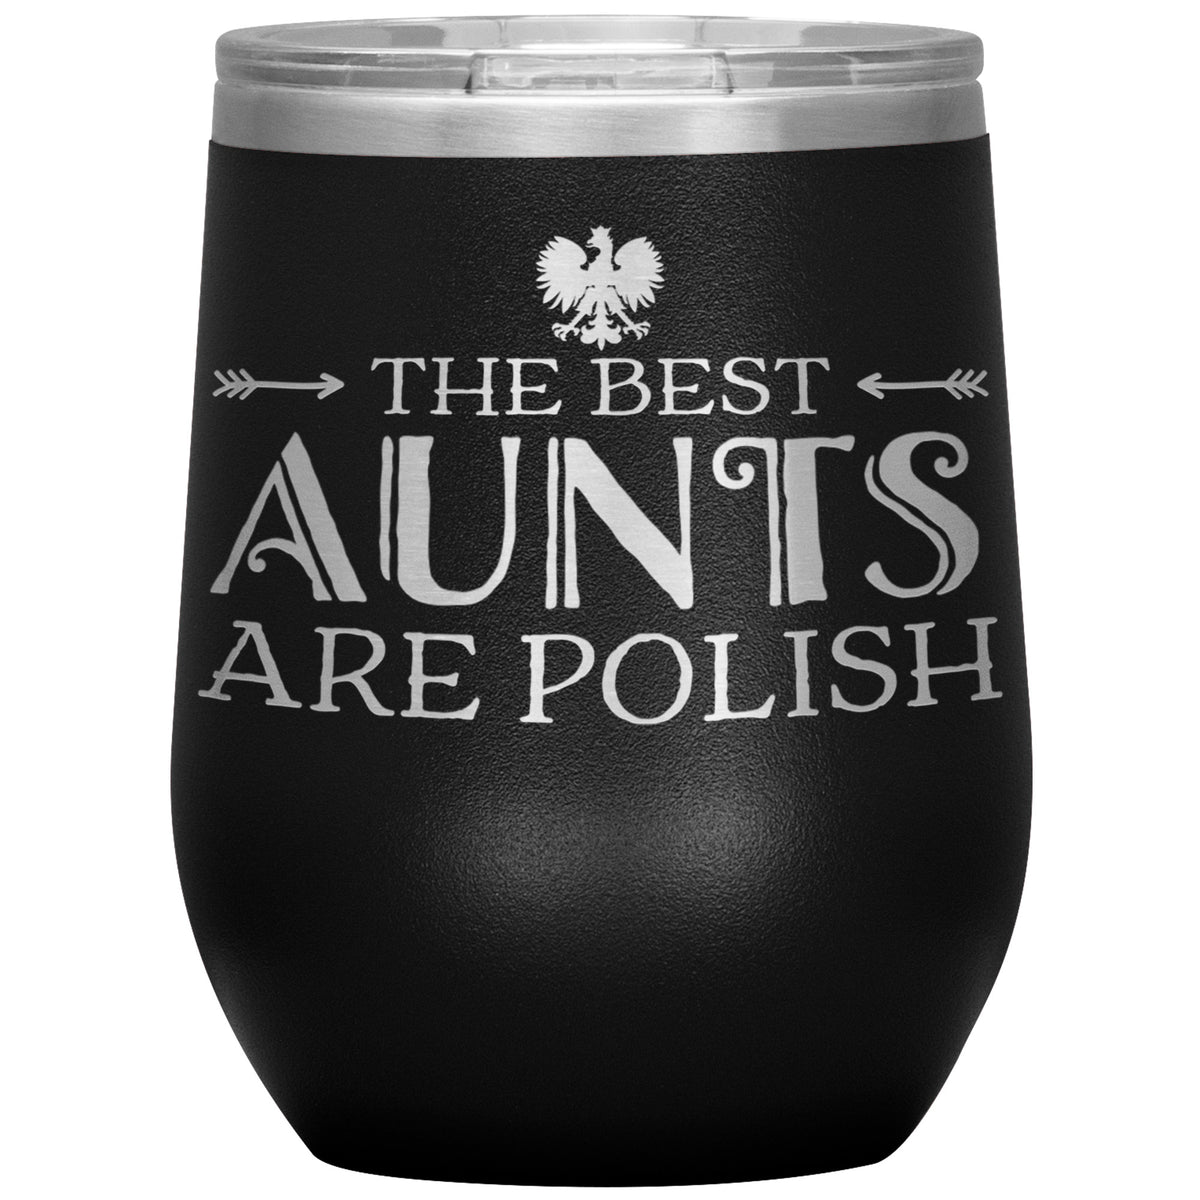 The Best Aunts Are Polish Insulated Wine Tumbler Tumblers teelaunch Black  